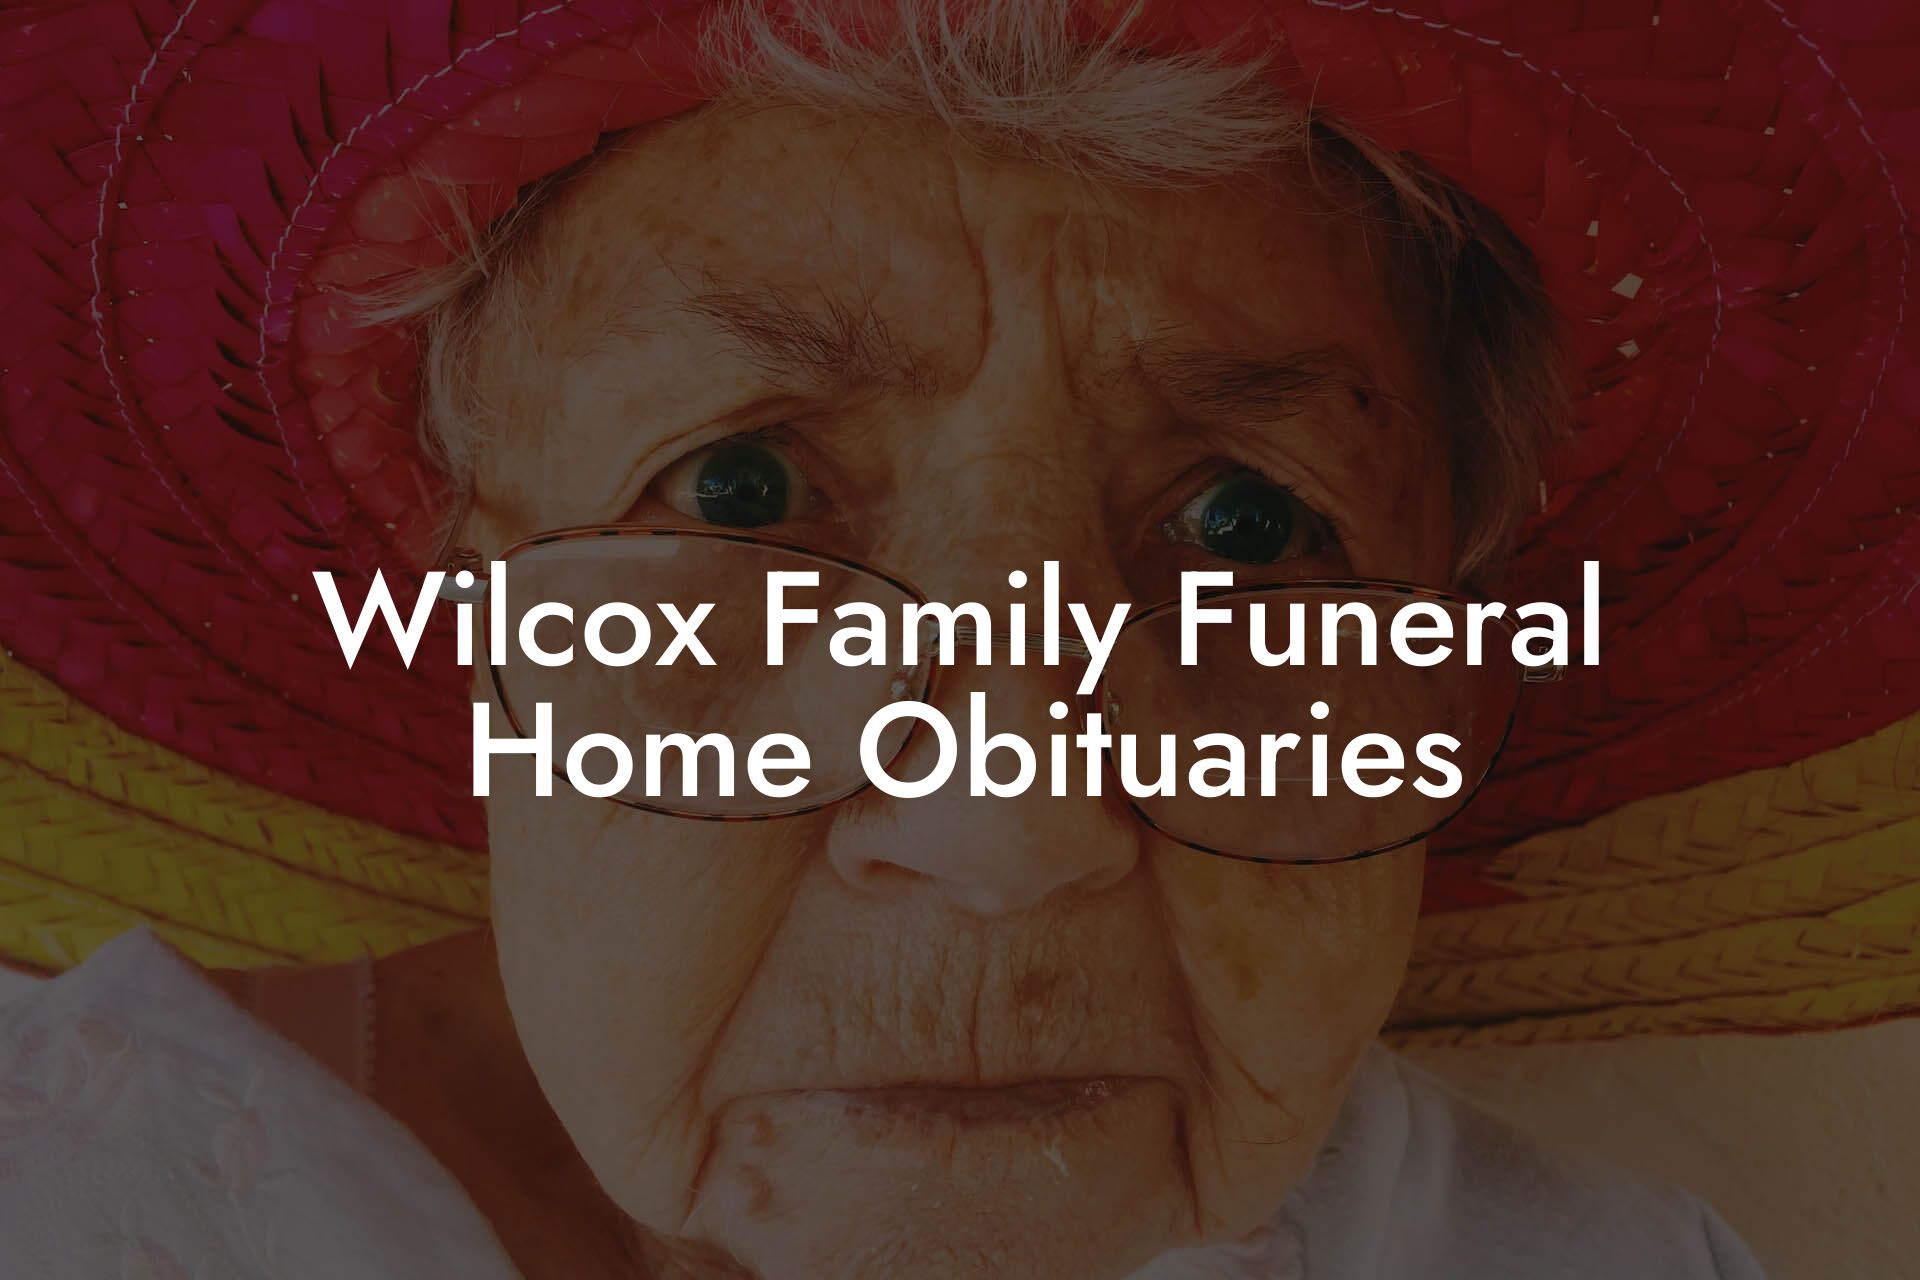 Wilcox Family Funeral Home Obituaries